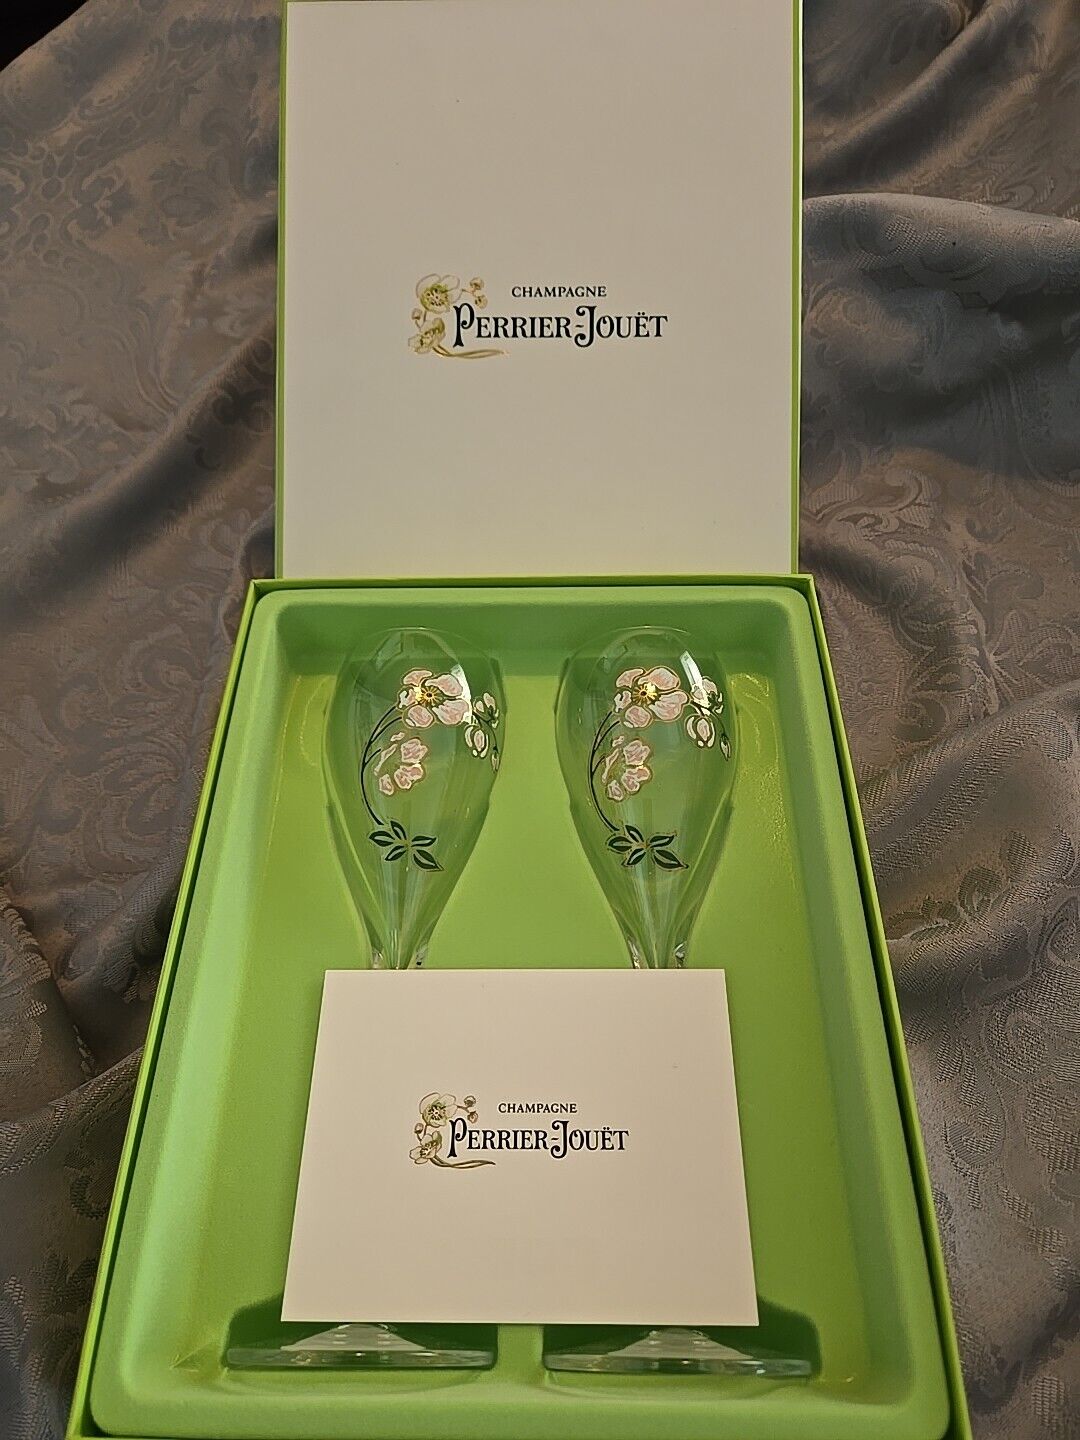 Perrier-Jouet Champagne Flutes In Original Box Never Used